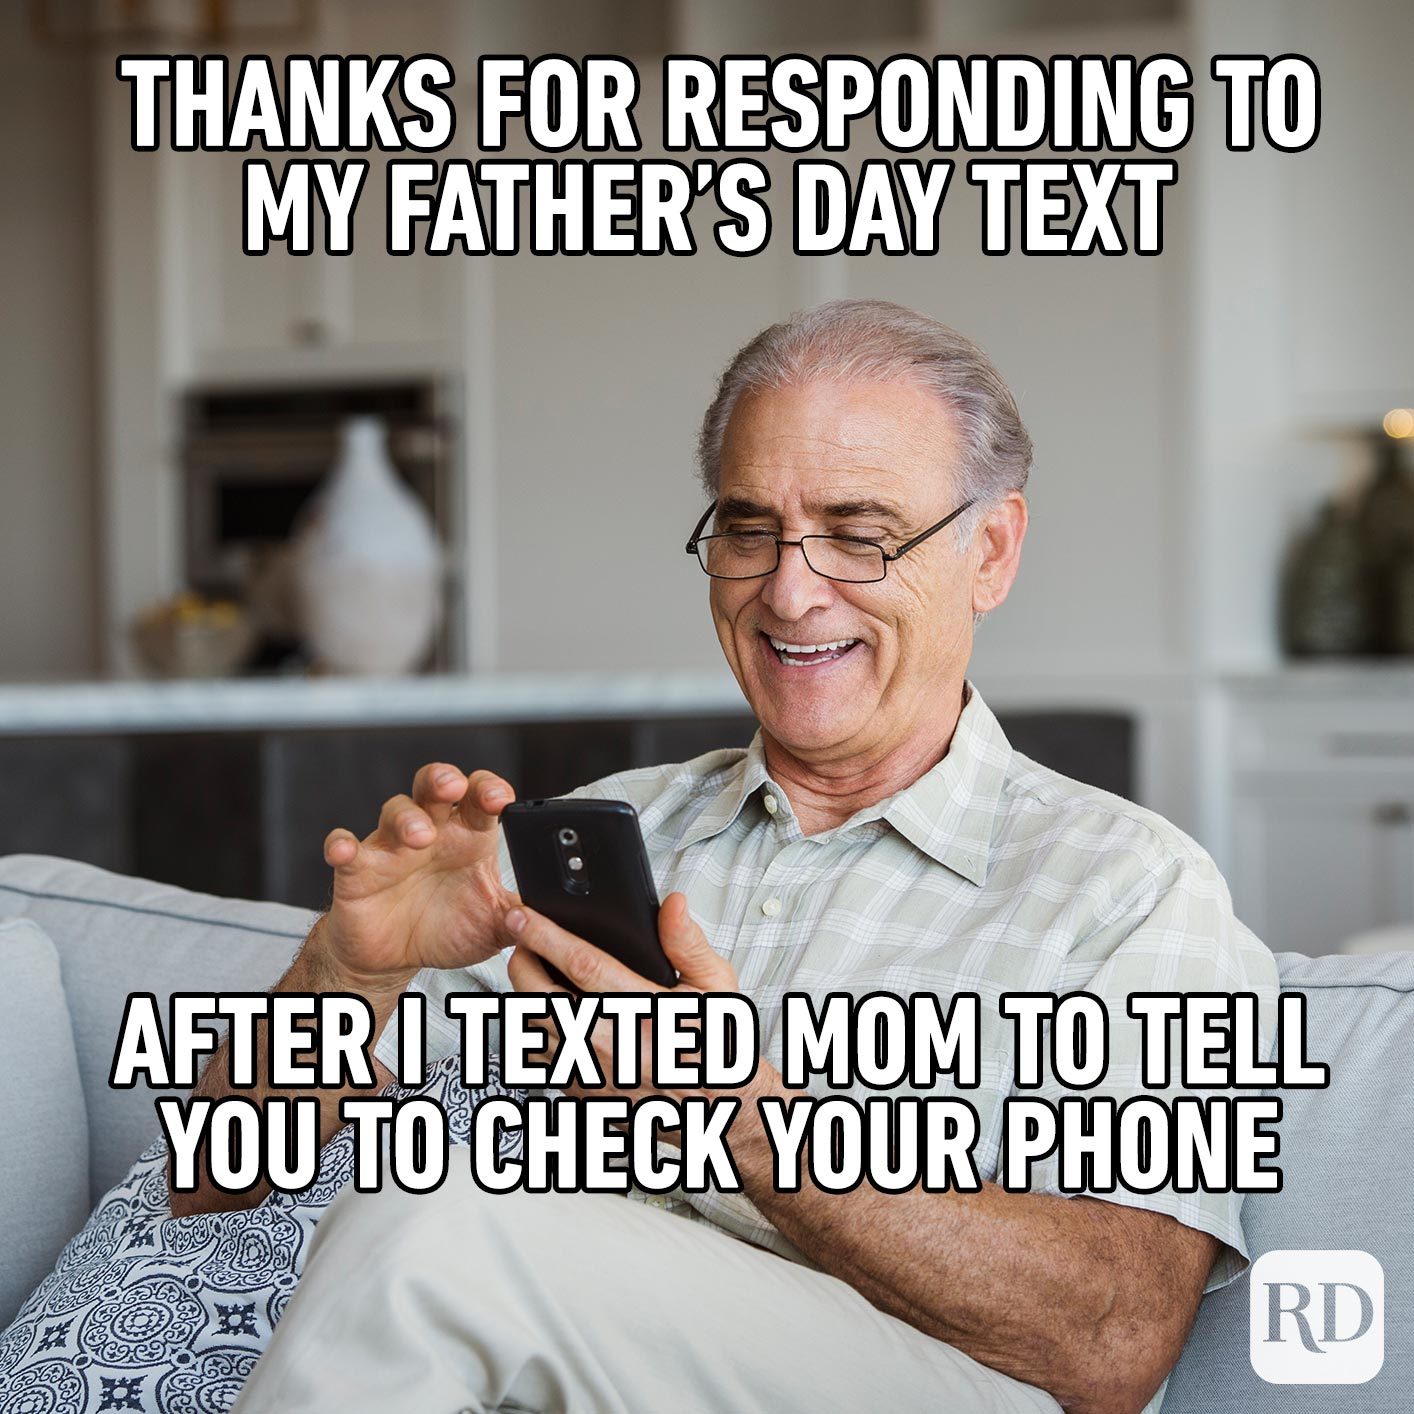 Old man smiling at phone. Meme text: Thanks for responding to my Father's Day text after I texted Mom to tell you to check your phone